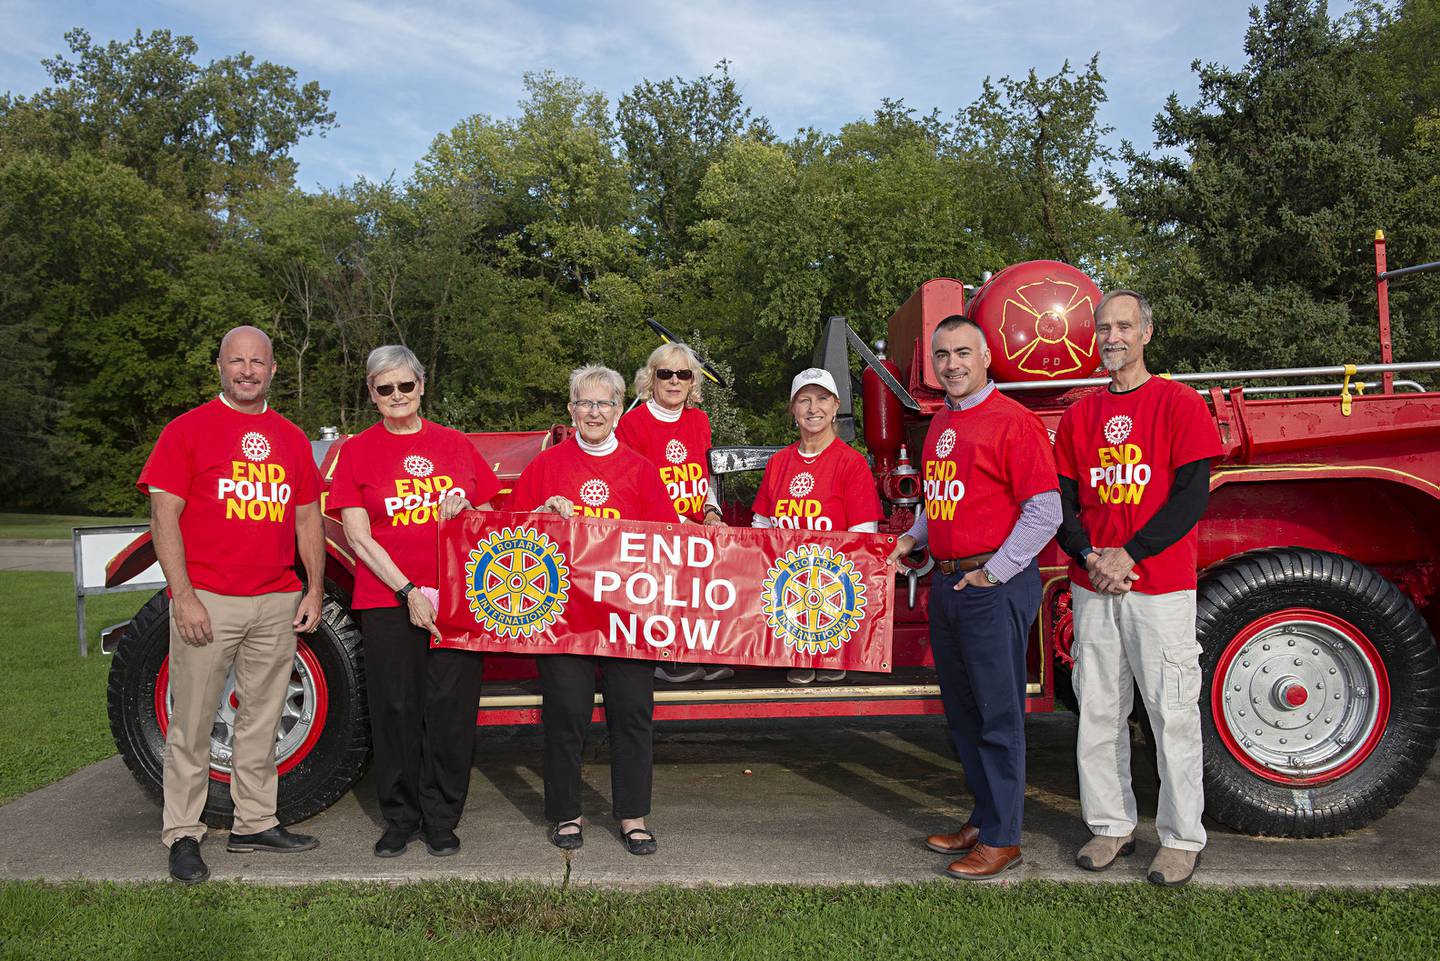 Rotary members from Sterling, Rock Falls and Walnut invite you to participate in the seventh annual End Polio Now walk on October 8, 2022 at Centennial Park in Rock Falls. The non-competitive walk will be approximately 2.5 miles will run along the canal to East Second Street to First Avenue and back to Centennial Park. Rotary members pictured are: Tom Meyers (left), Gail Wright, Betty Clementz, Cheryl Faber, Jan Pistole, Nick Lareau and David Poust.